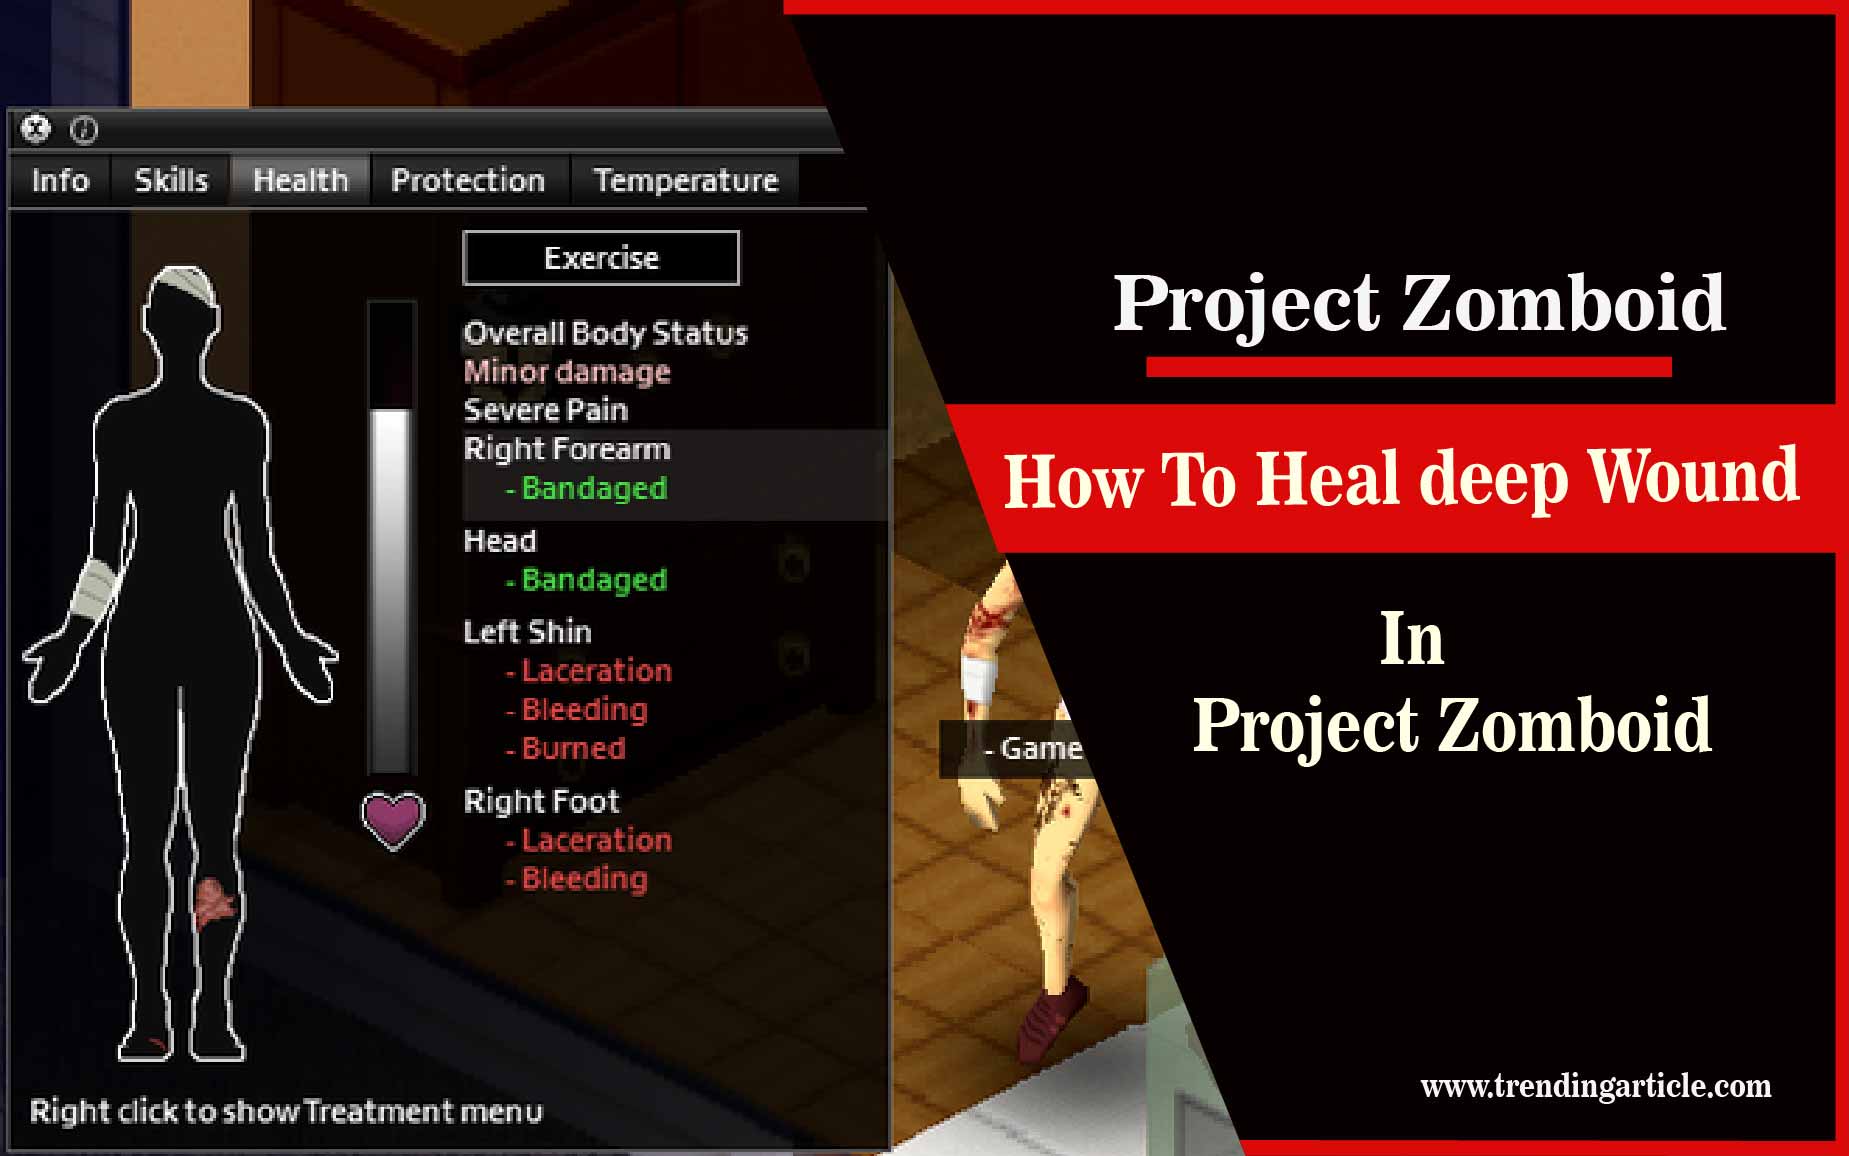 How To Heal a Laceration in Project Zomboid